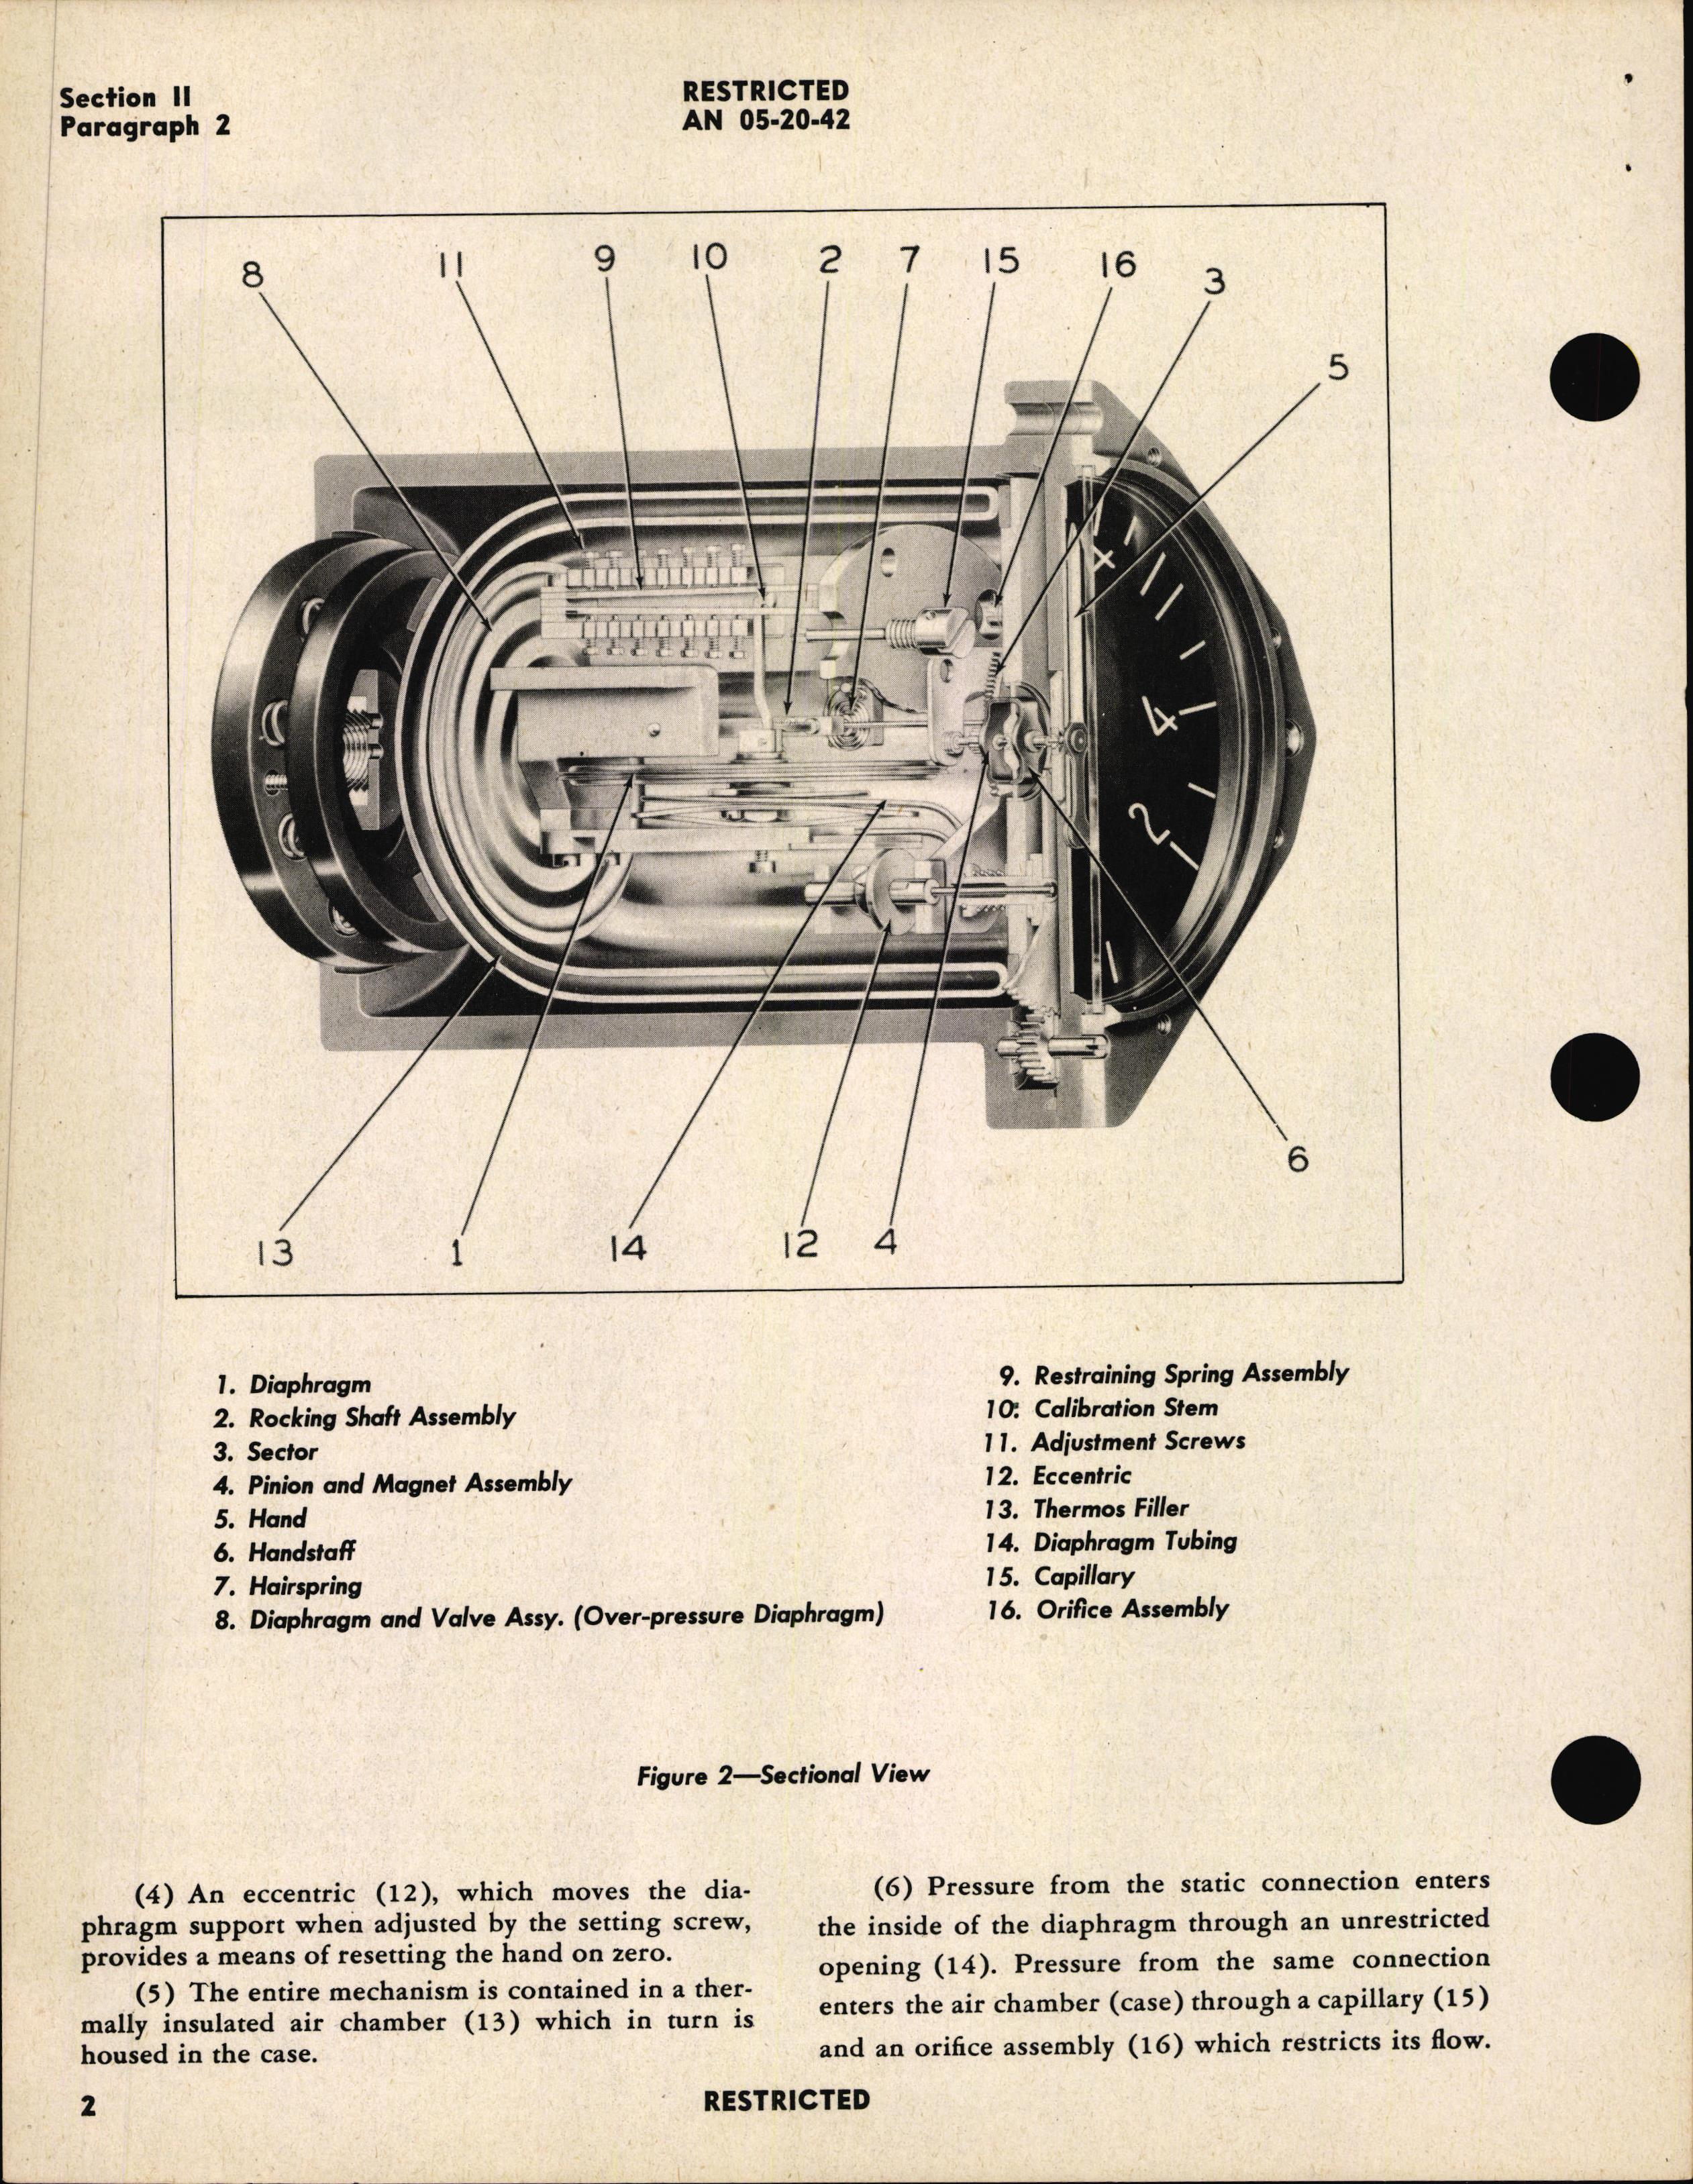 Sample page 6 from AirCorps Library document: Handbook of Instructions with Parts Catalog for Type C-3 Rate of Climb Indicator